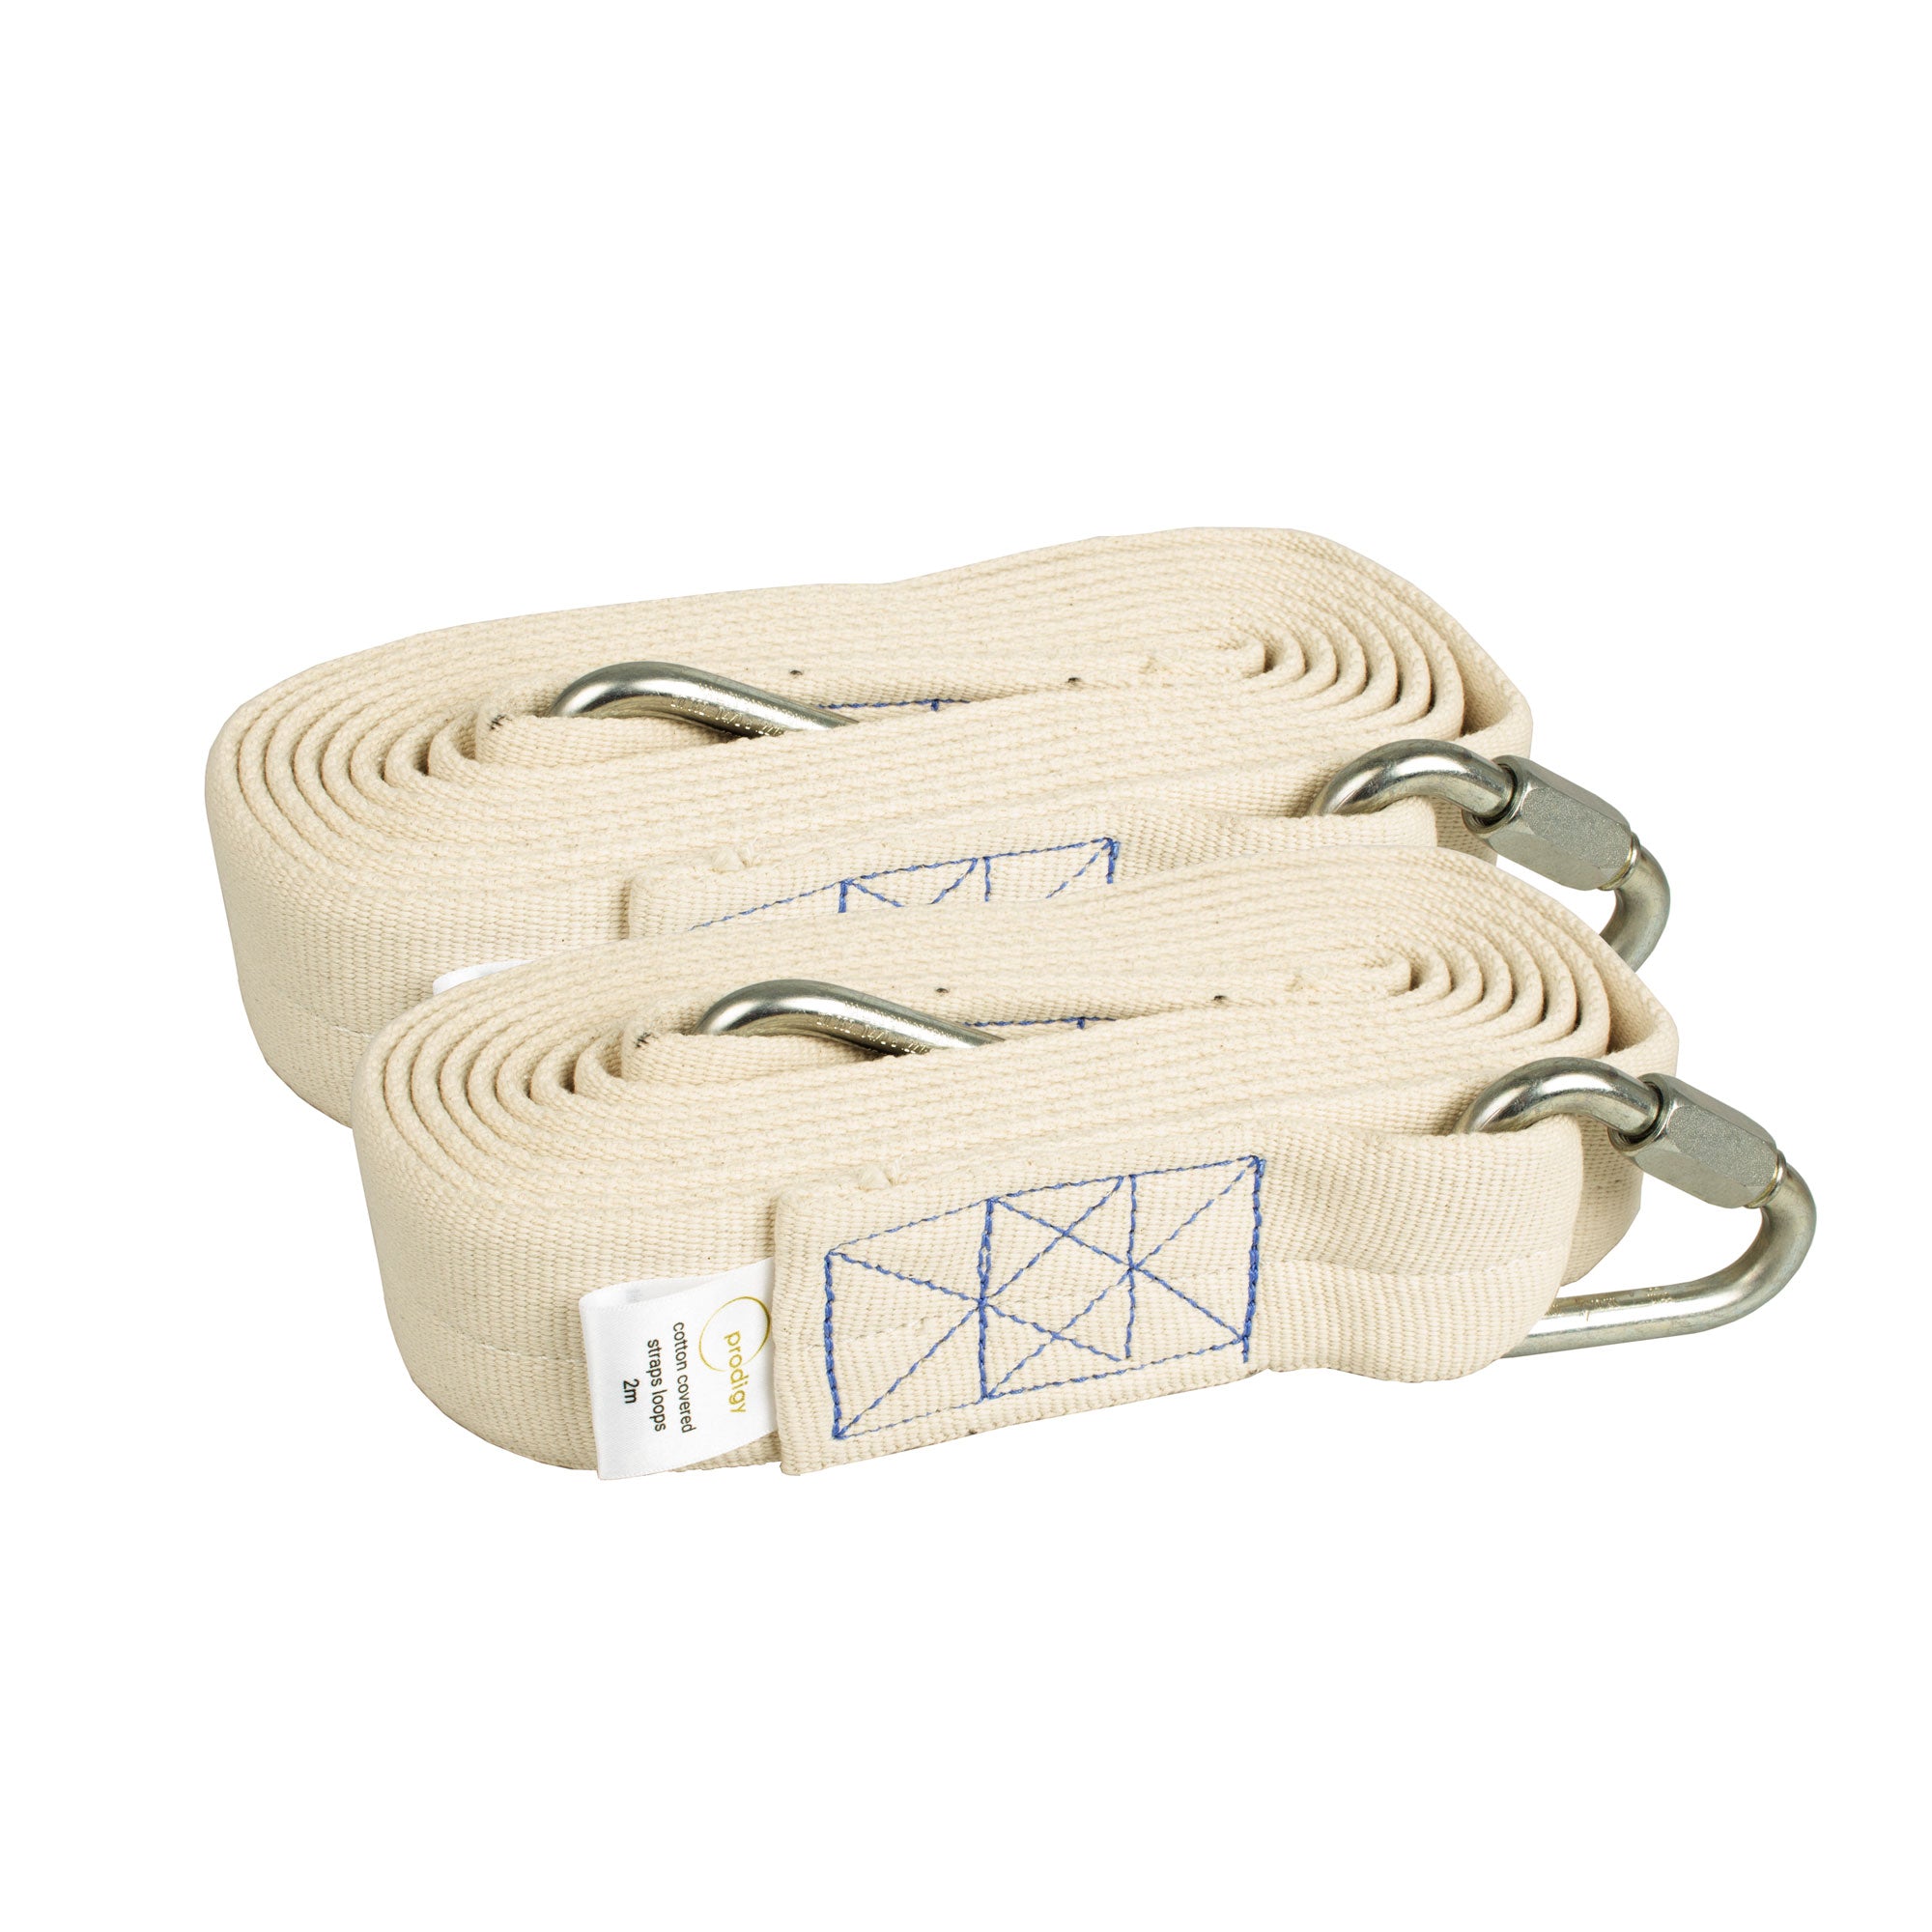 Prodigy cotton covered aerial loop 200cm coiled up